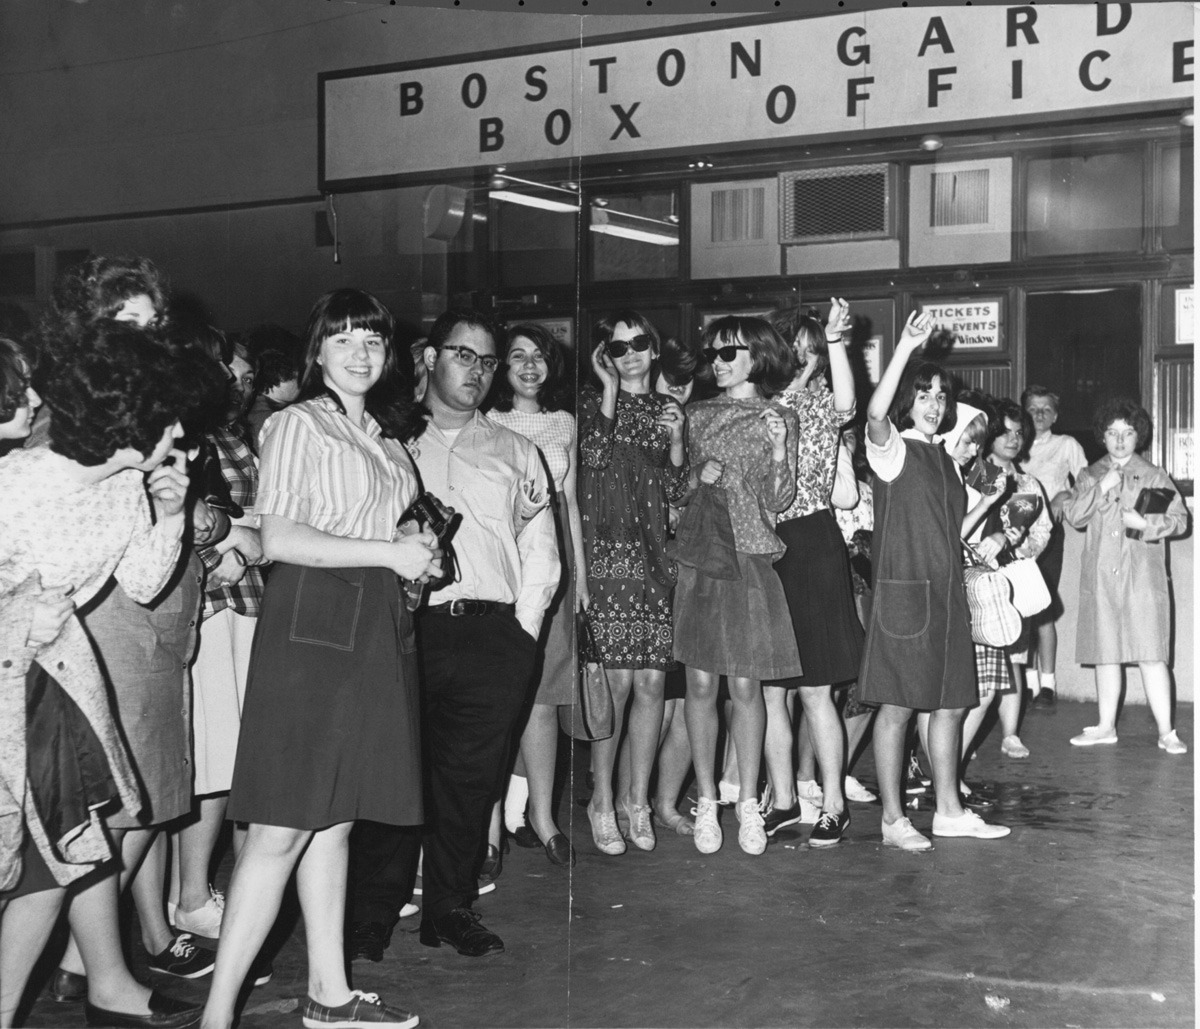 Inactive Blog Beatles Fans At The Boston Garden Box Office